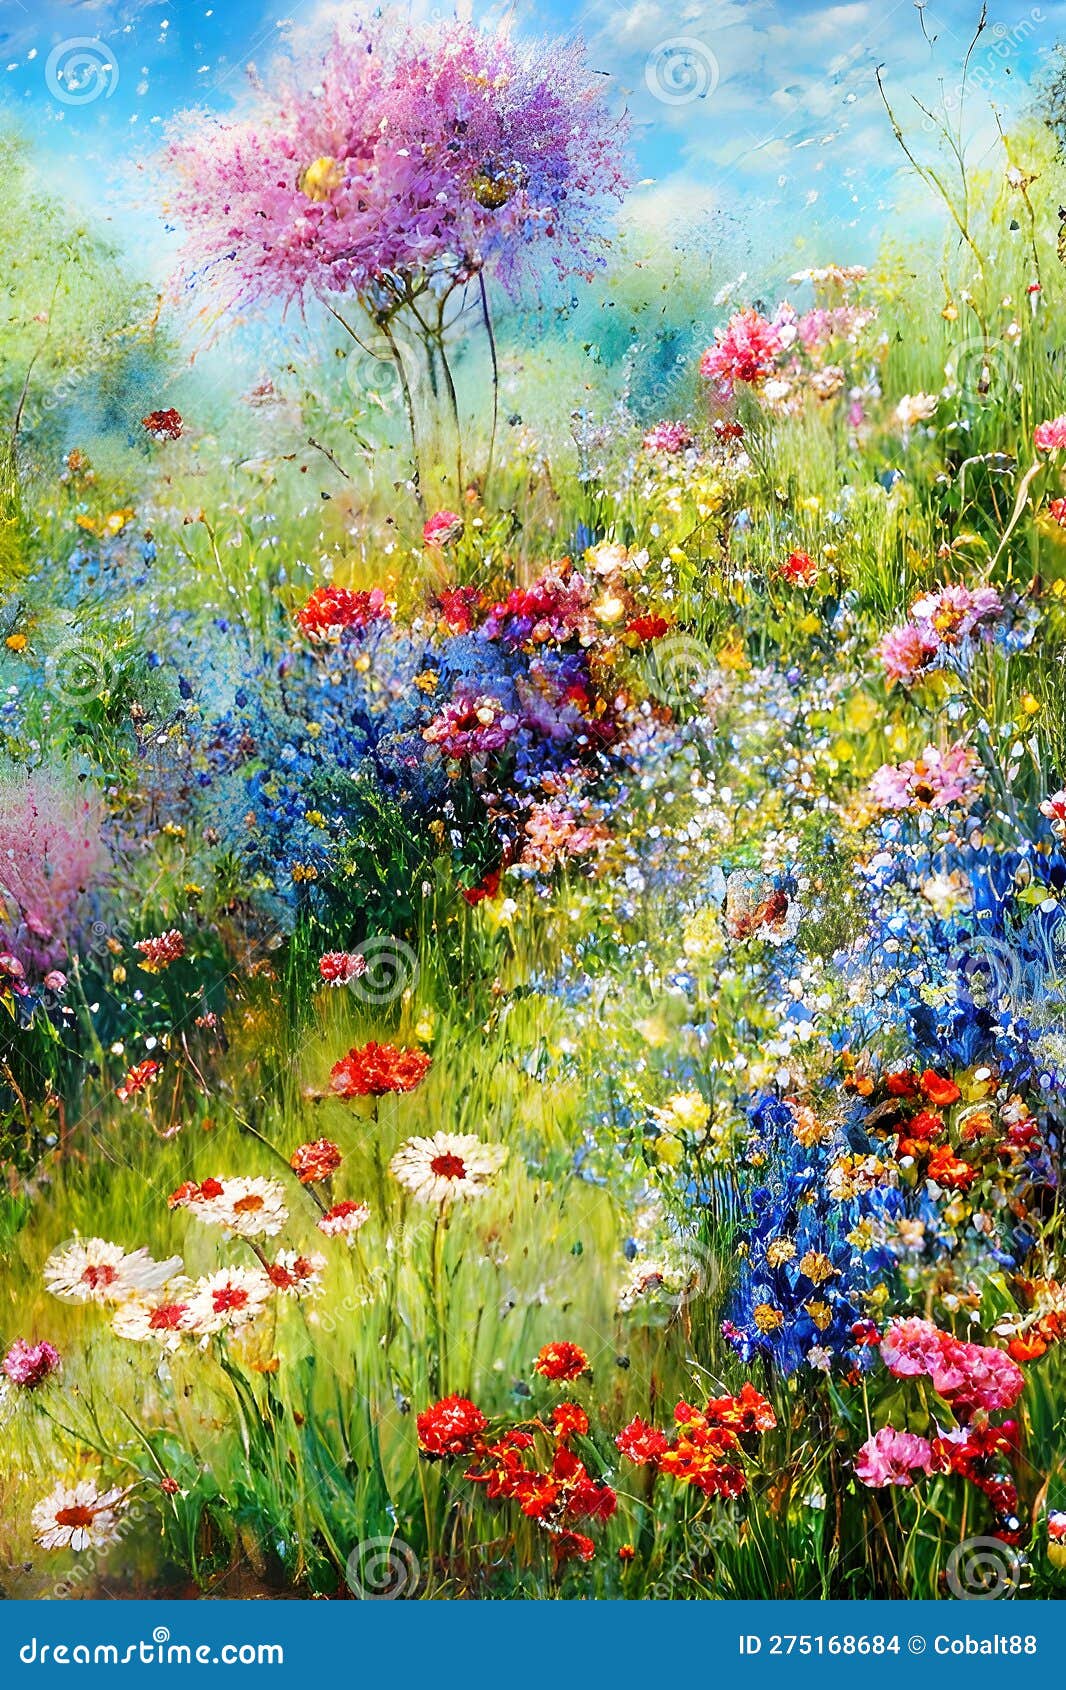 Watercolor Flowers Landscape Background, Impressionism Style ...